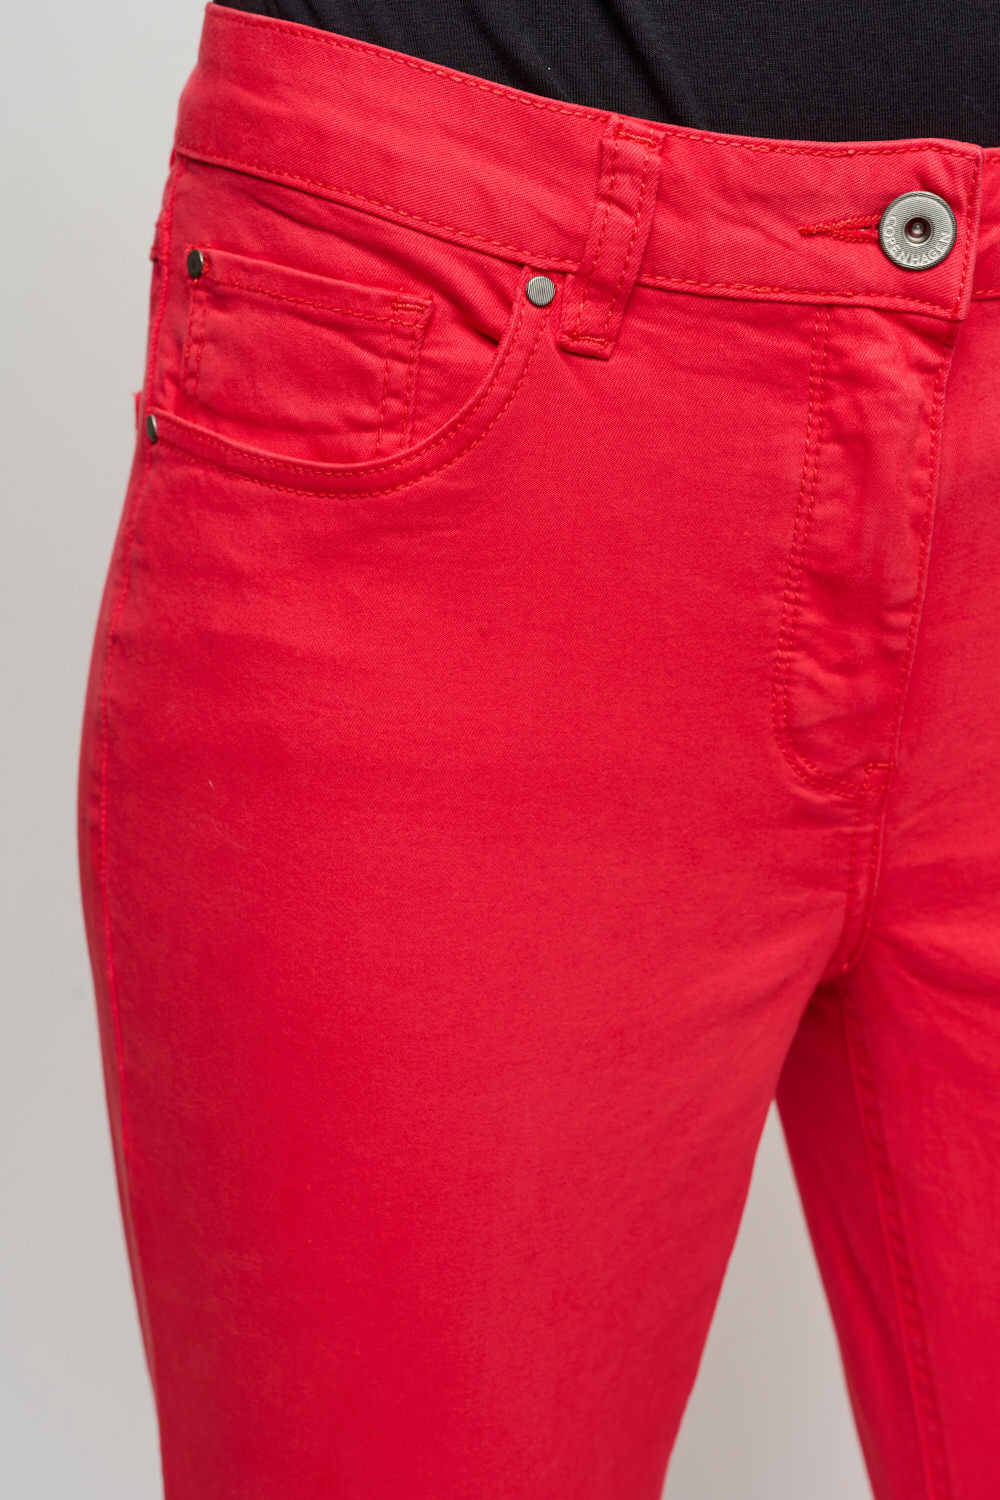 Jeans 7/8 - Poinsettia Red